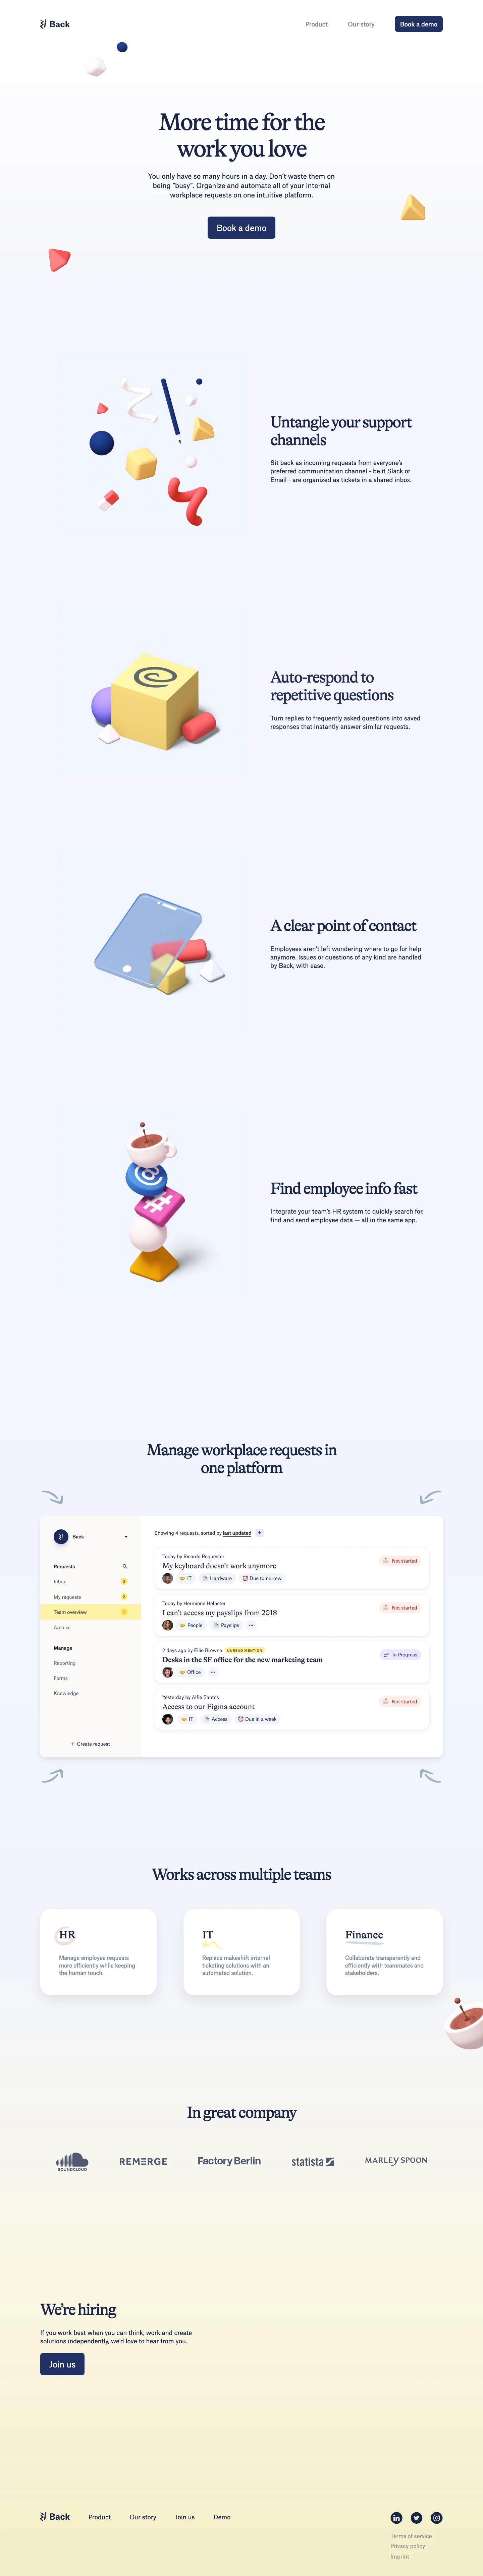 Back Landing Page Example: You only have so many hours in a day. Don’t waste them on being “busy”. Organize and automate all of your internal workplace requests on one intuitive platform.